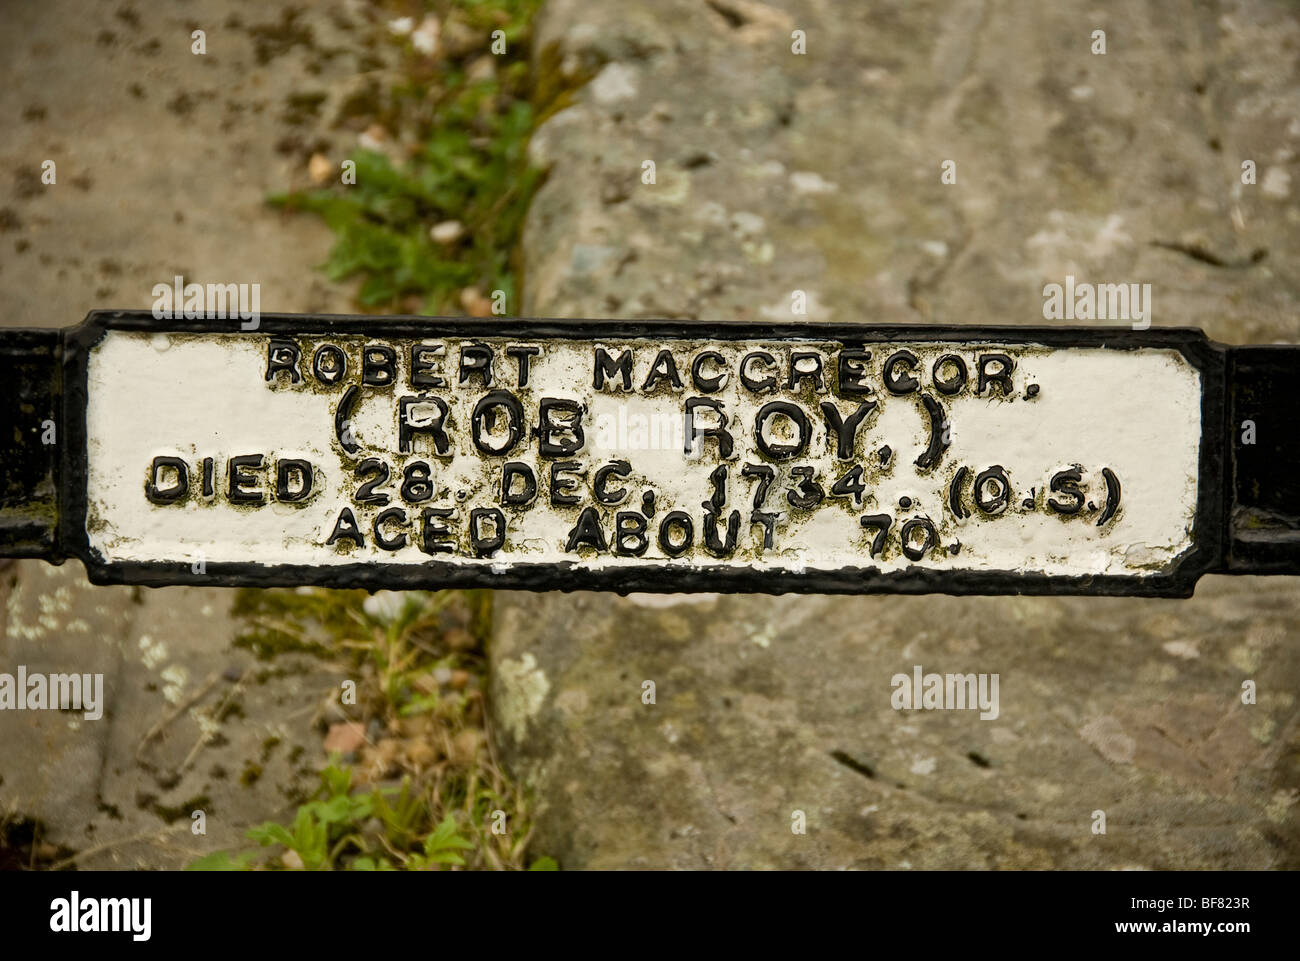 Rob Roys Grave. Closeup of the Robert MacGregor name plaque on family grave. Stock Photo